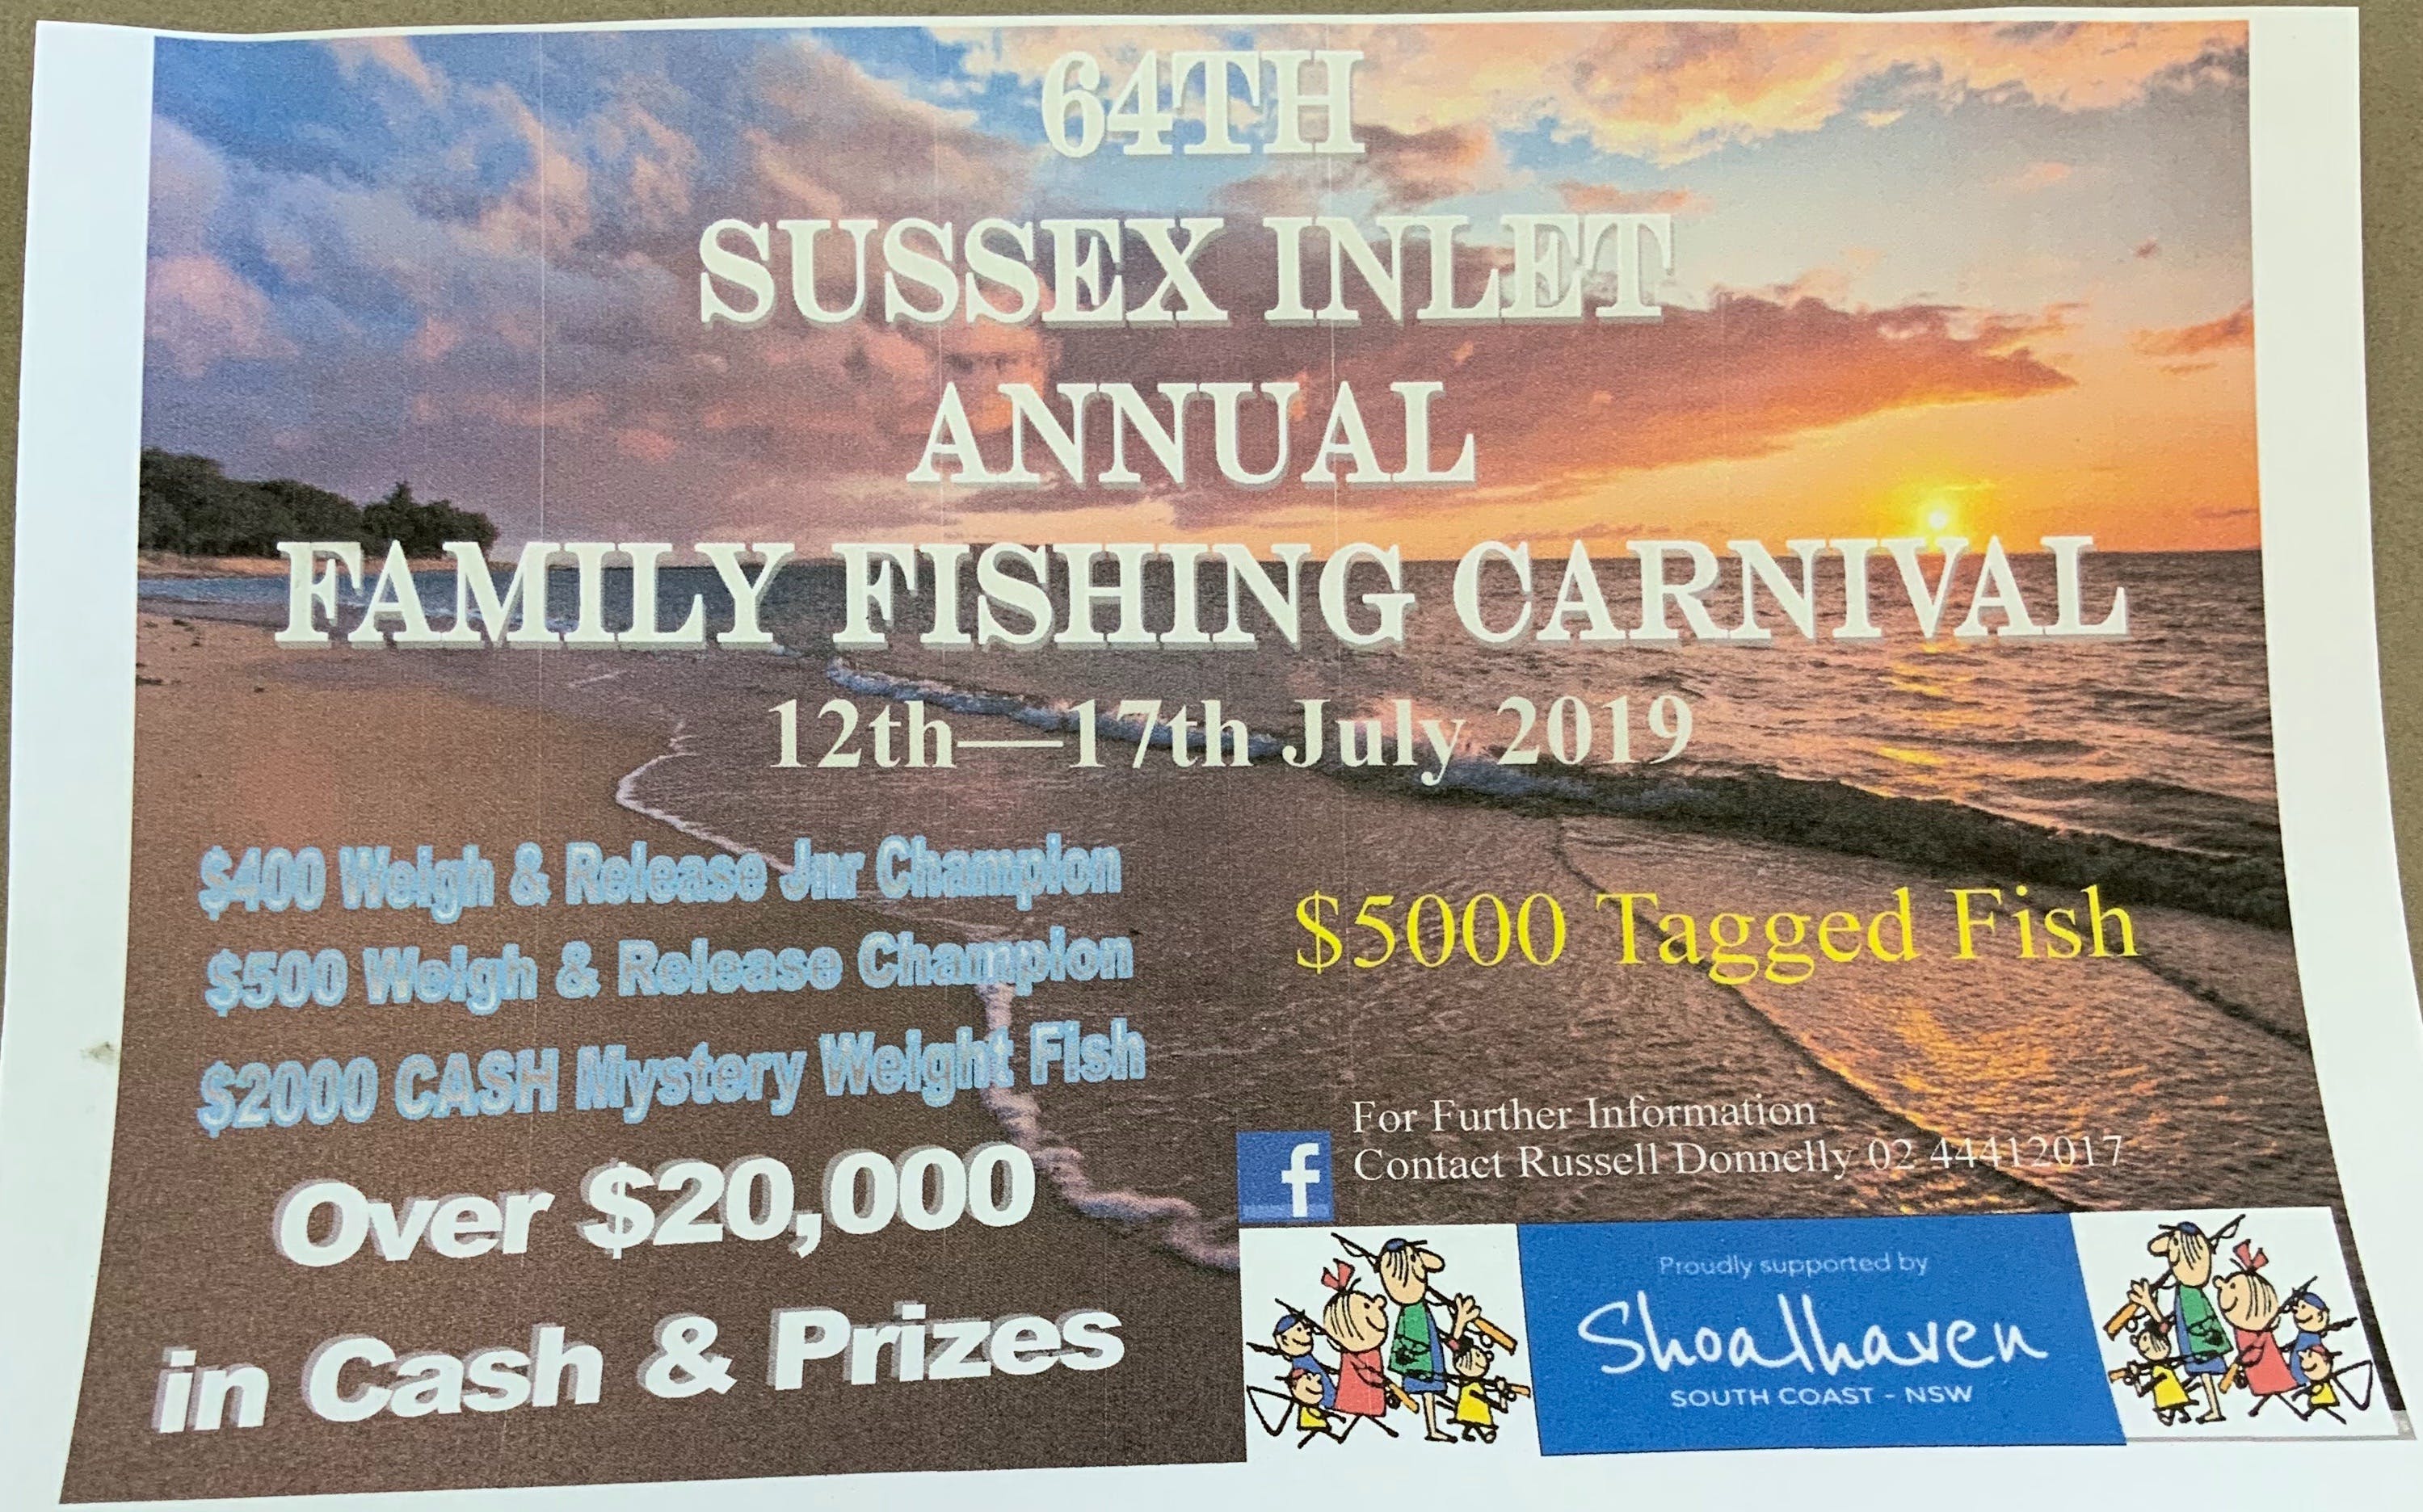 The Sussex Inlet Annual Family Fishing Carnival - Tourism Canberra